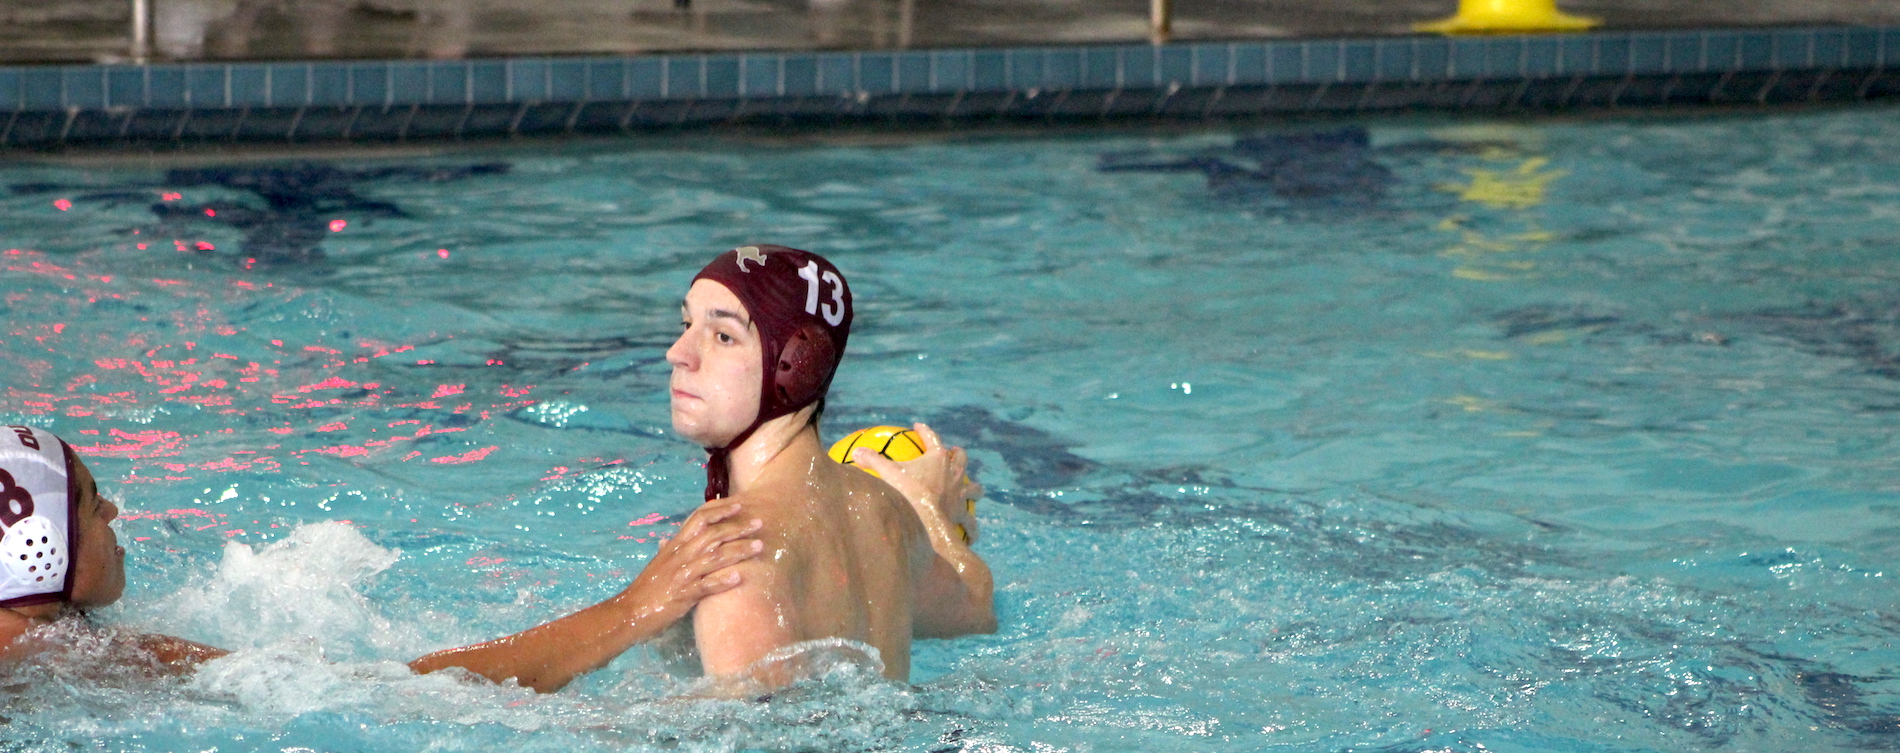 Men's Water Polo Finishes Season Ranked No. 10 in CWPA Poll